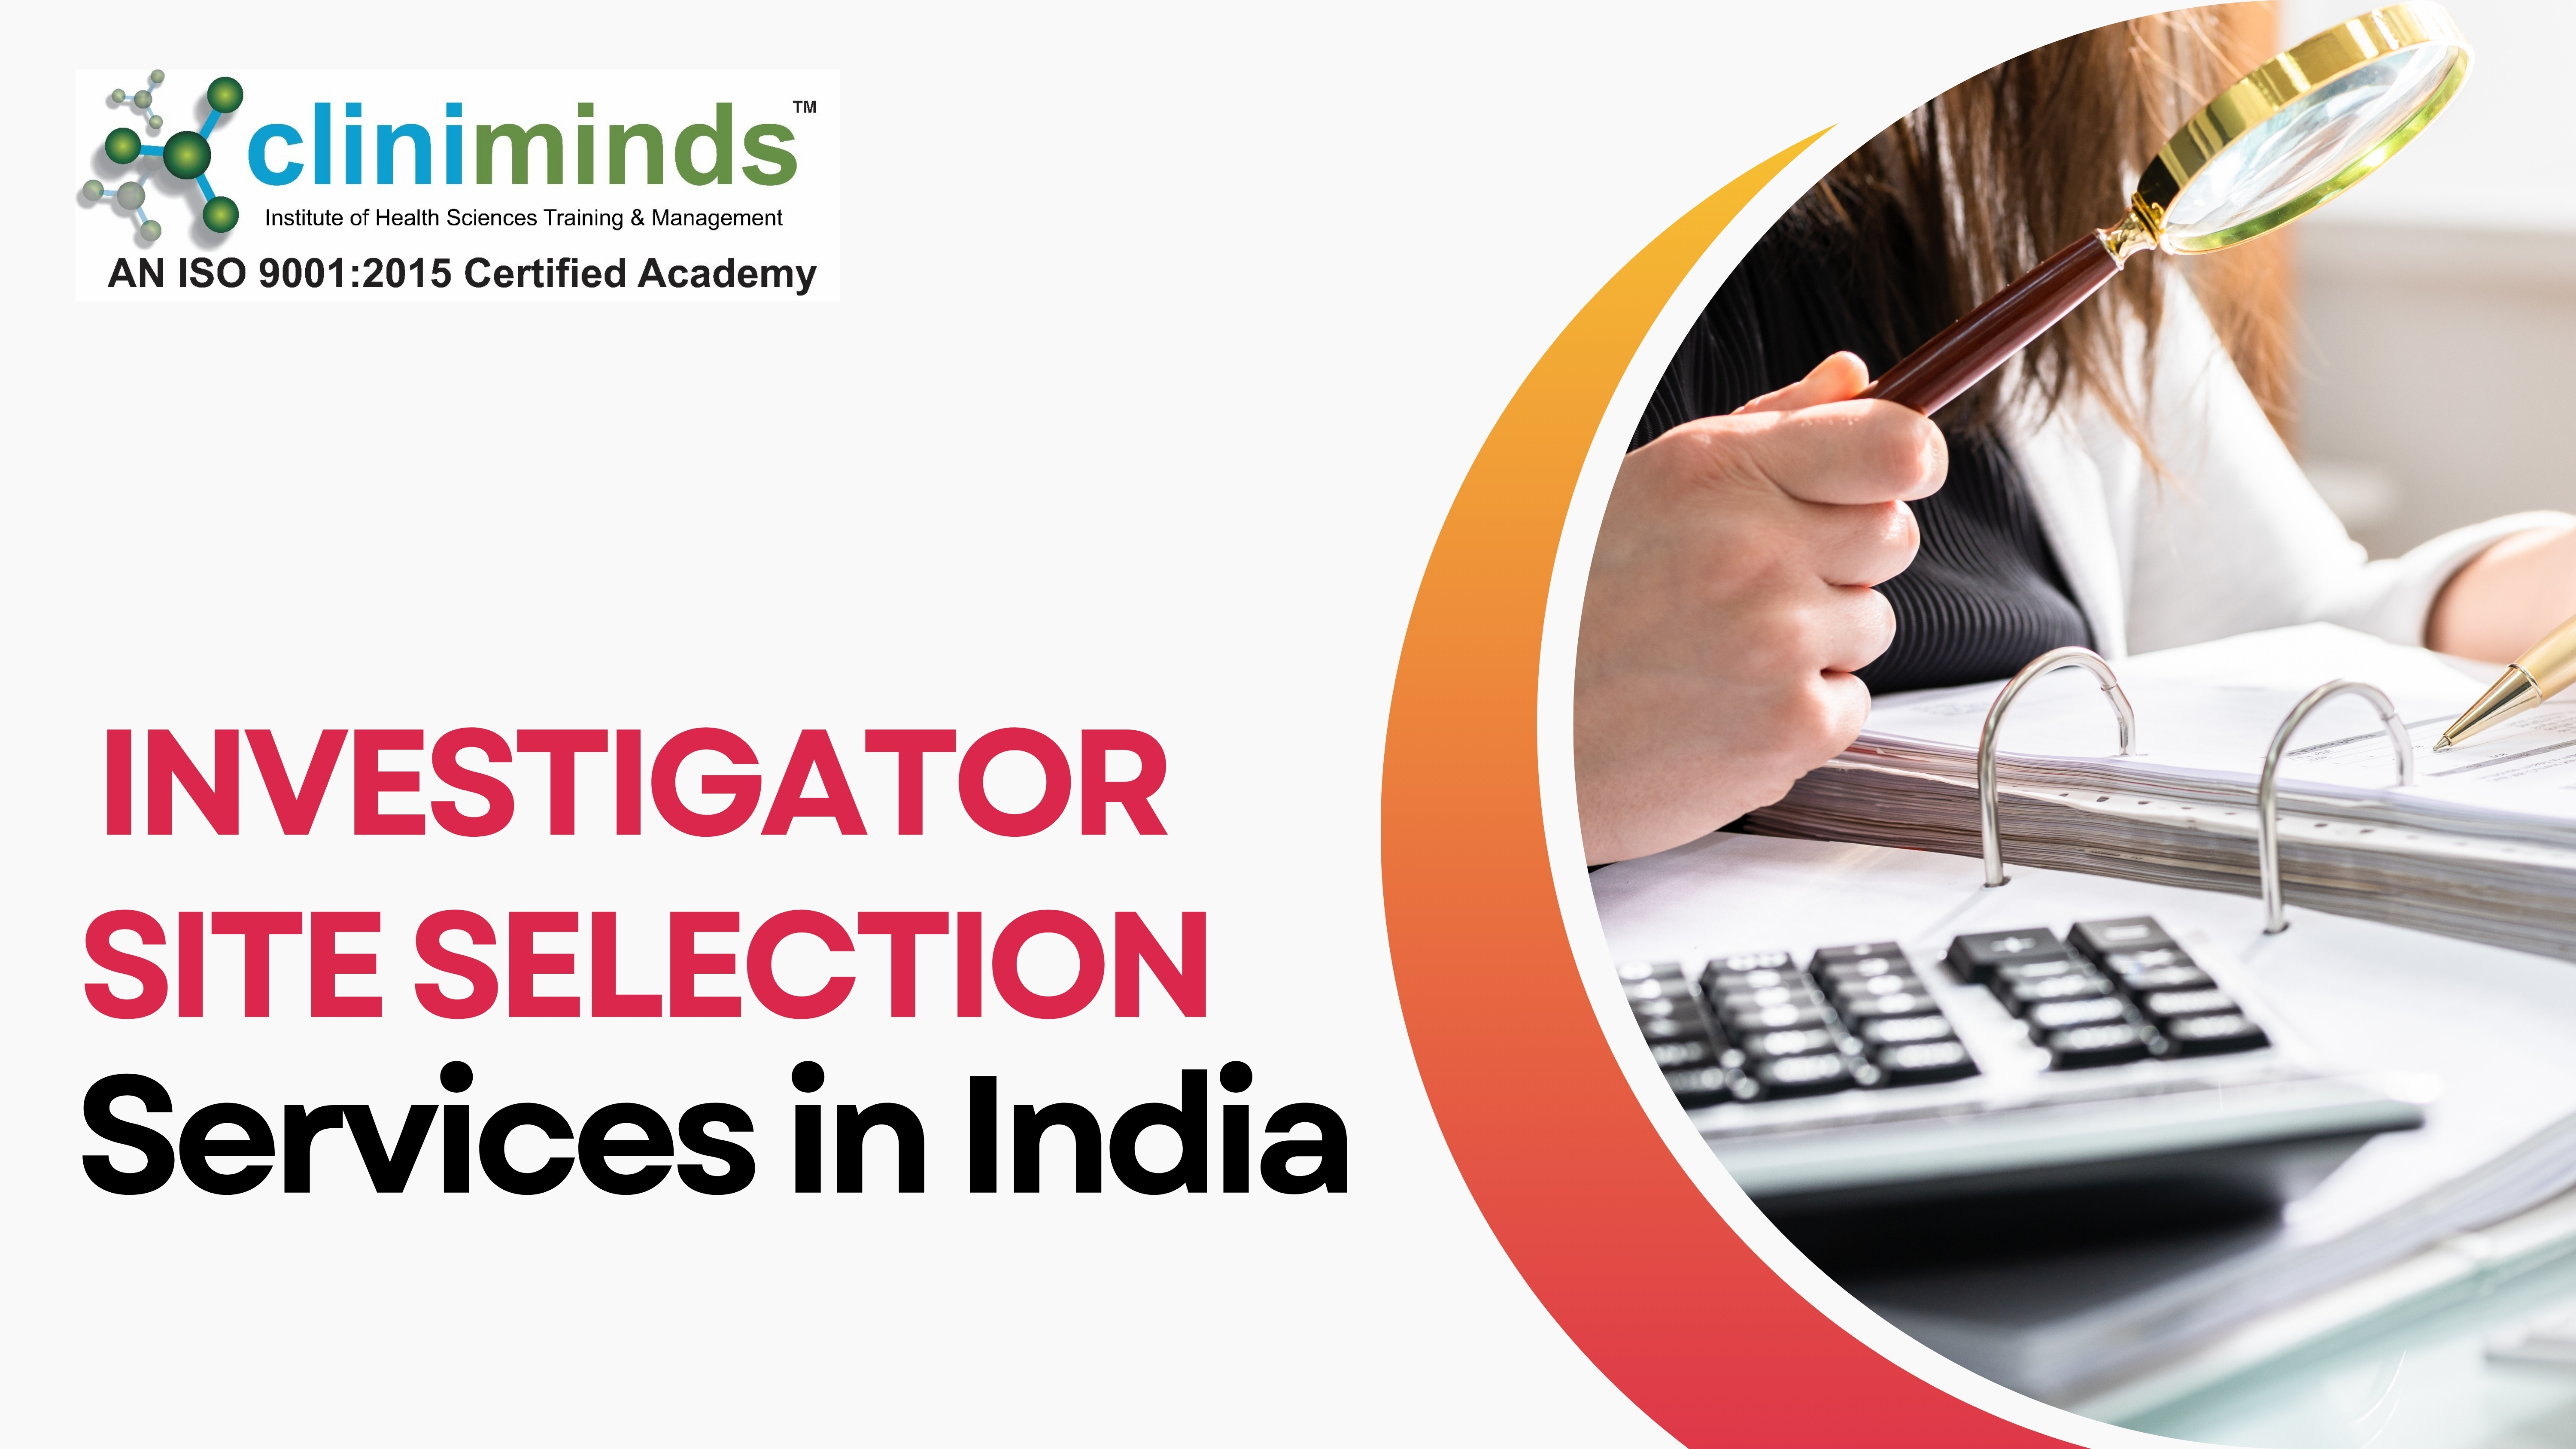 INVESTIGATOR SITE SELECTION SERVICES IN INDIA